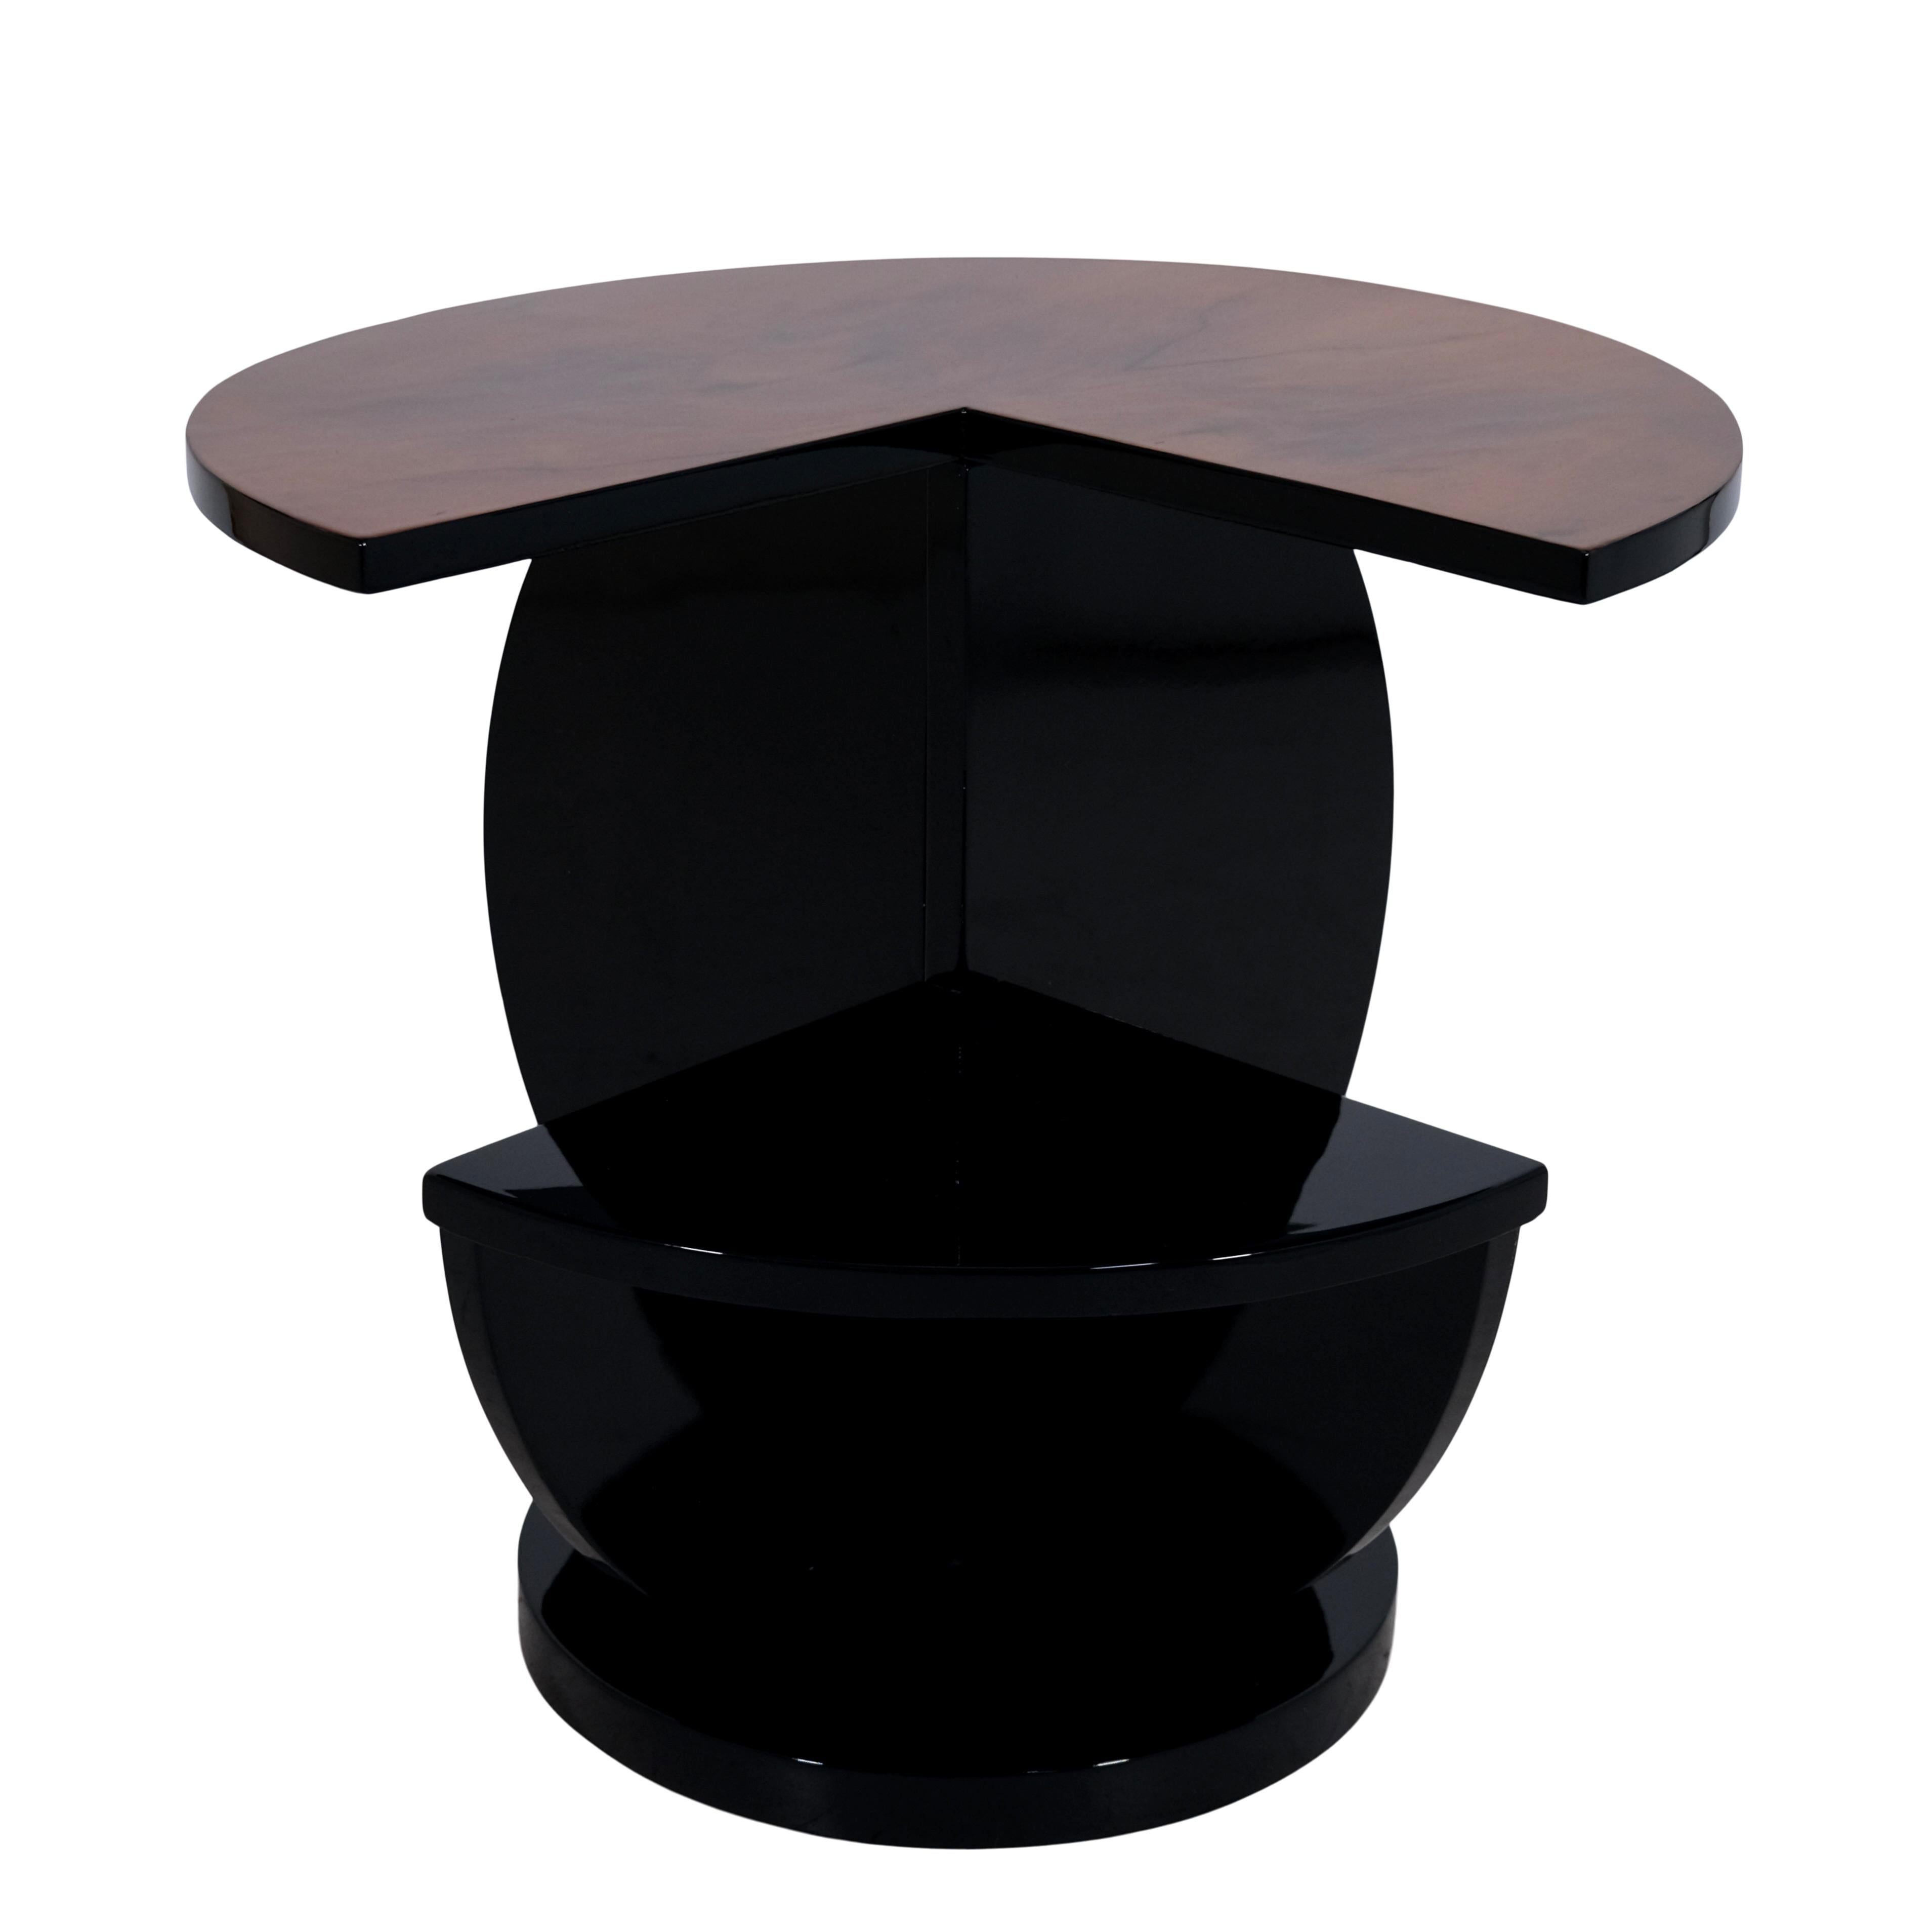 Segmented 1930s French Art Deco Side Table in High Gloss Black and Nutwood In Good Condition For Sale In Ulm, DE